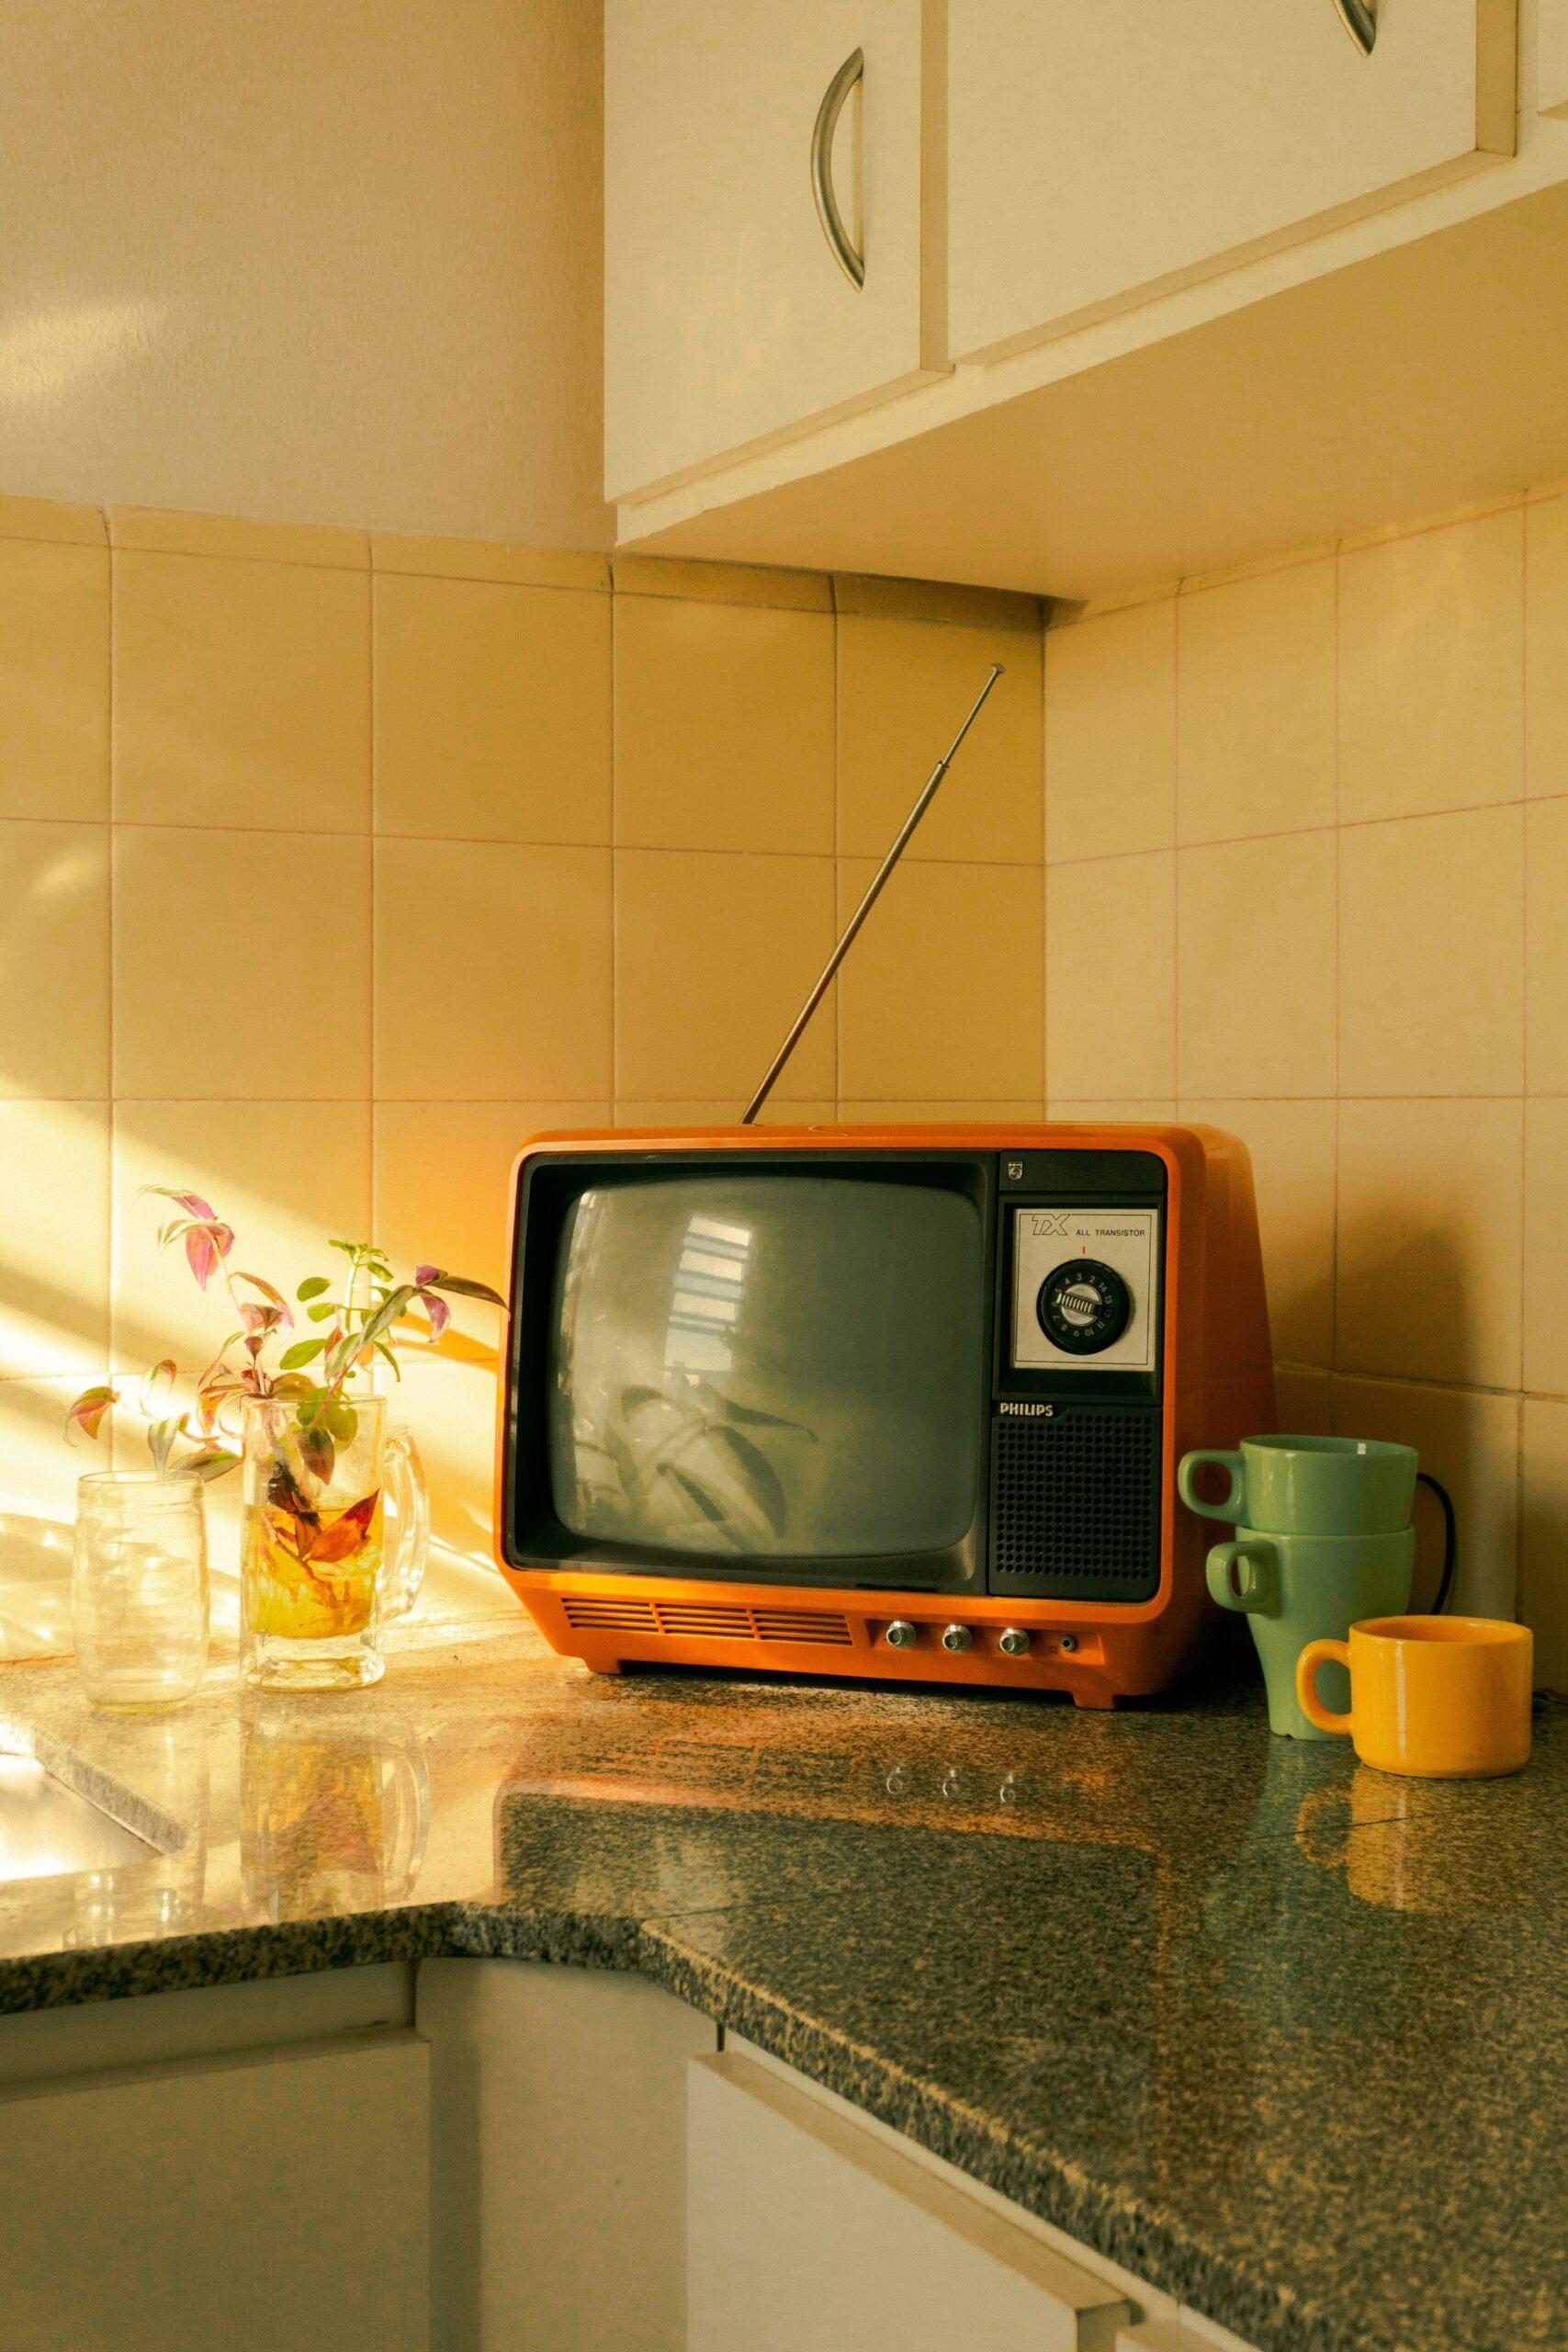 An old TV set in a kitchen